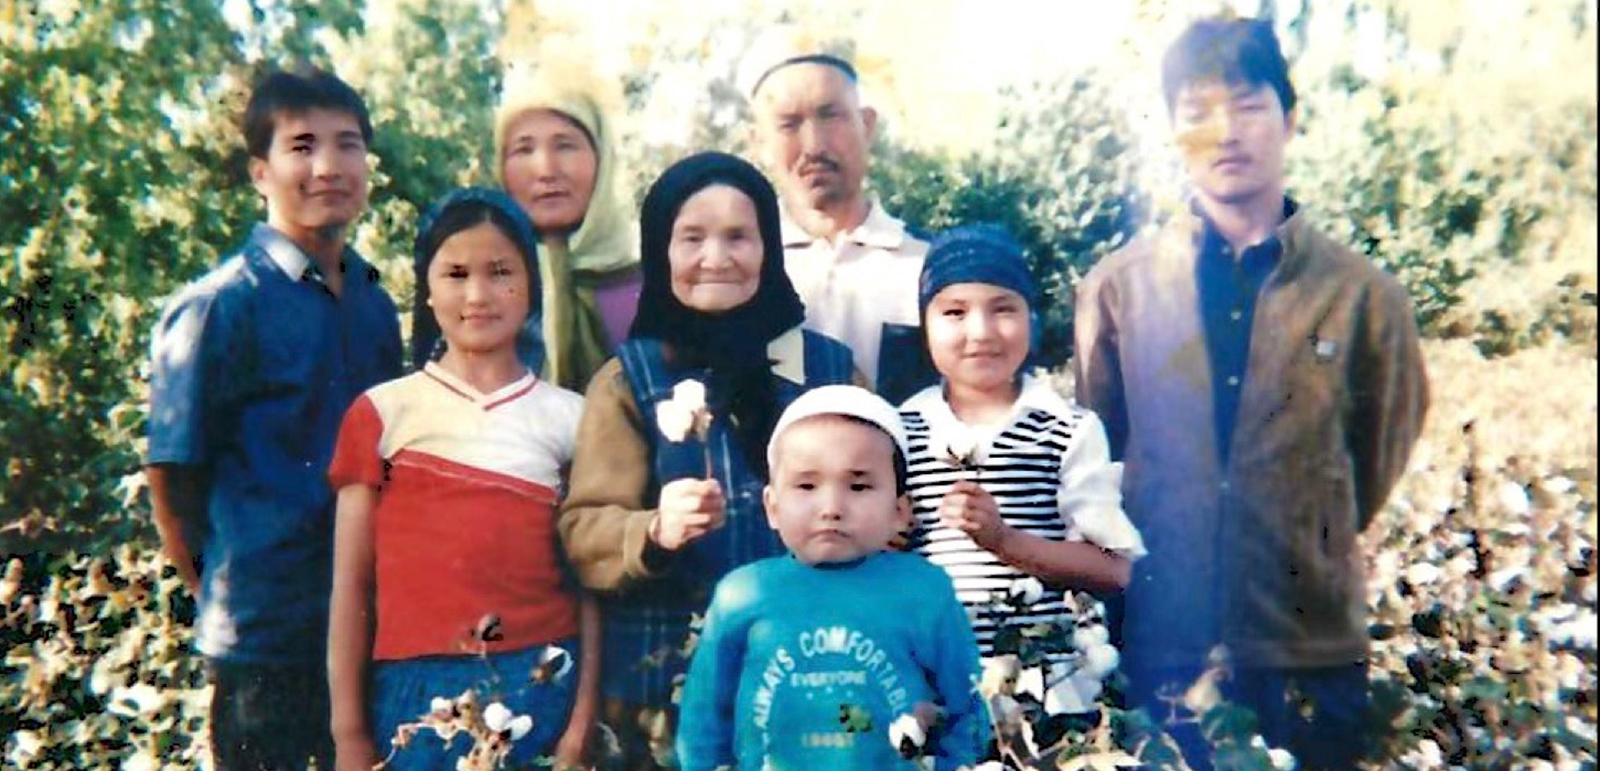 Kerim Zair, an Uyghur living in exile in London, has not heard from his family in China’s Xinjiang region since 2016: mother (middle) 2 sisters (right) two sister-in-laws (left).